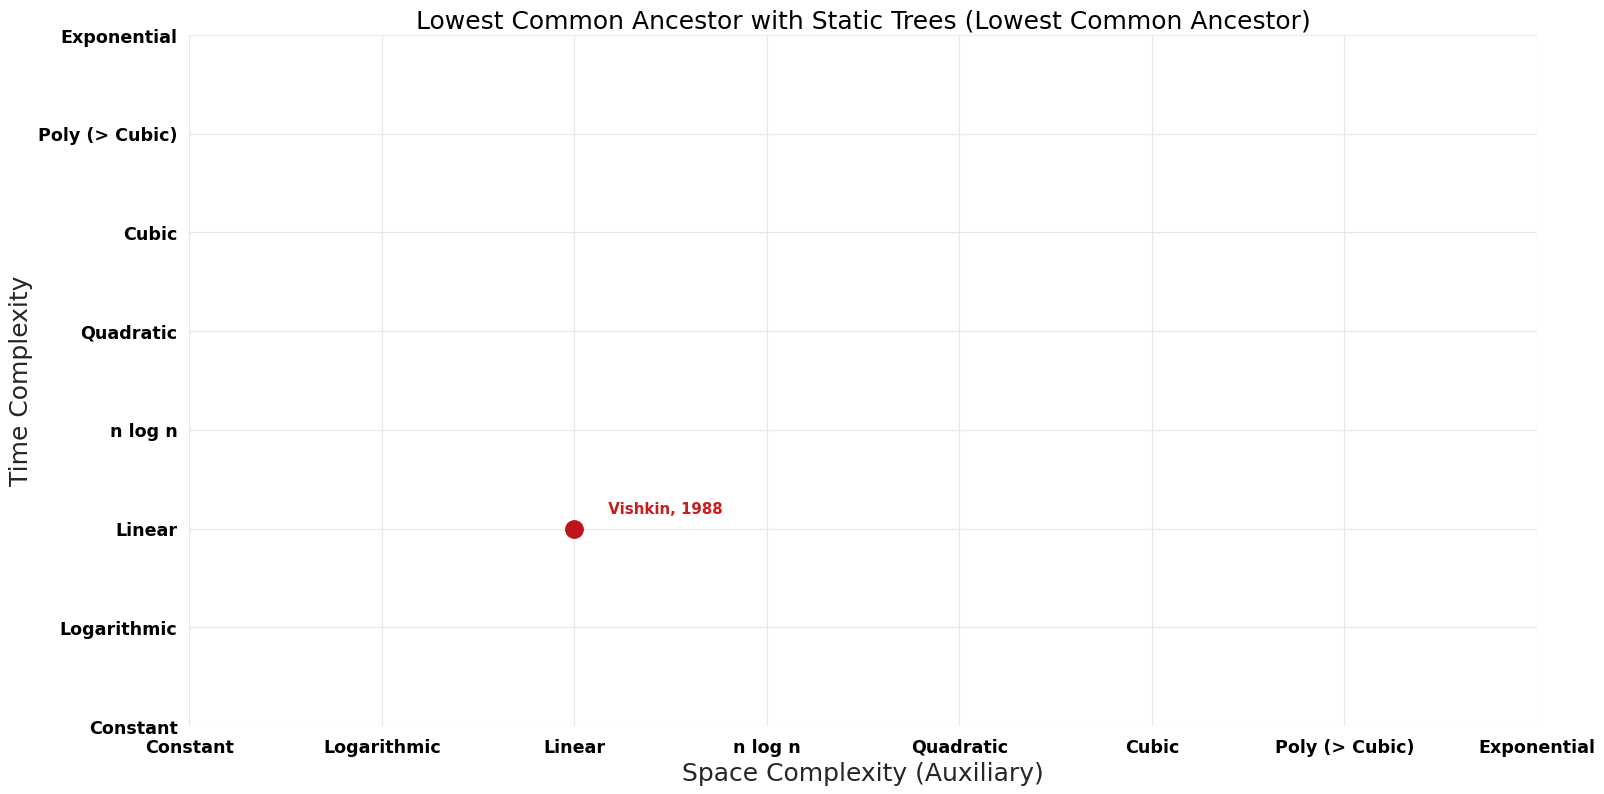 File:Lowest Common Ancestor - Lowest Common Ancestor with Static Trees - Pareto Frontier.png